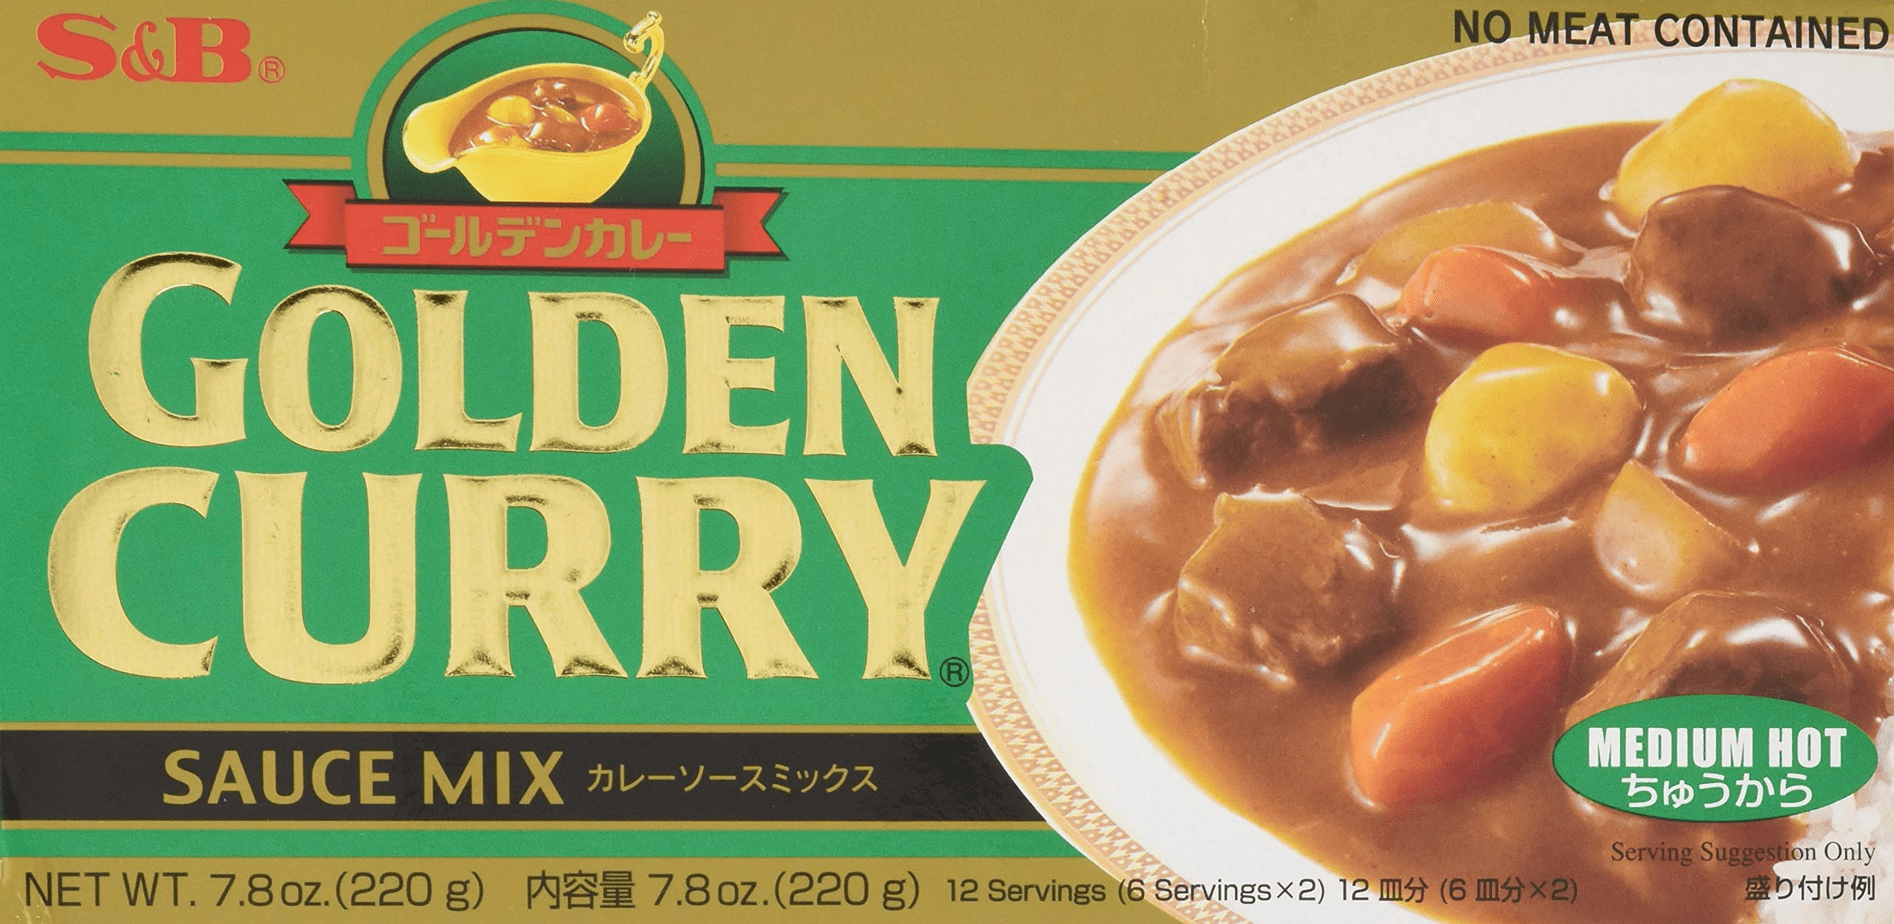 marque s&b golden curry